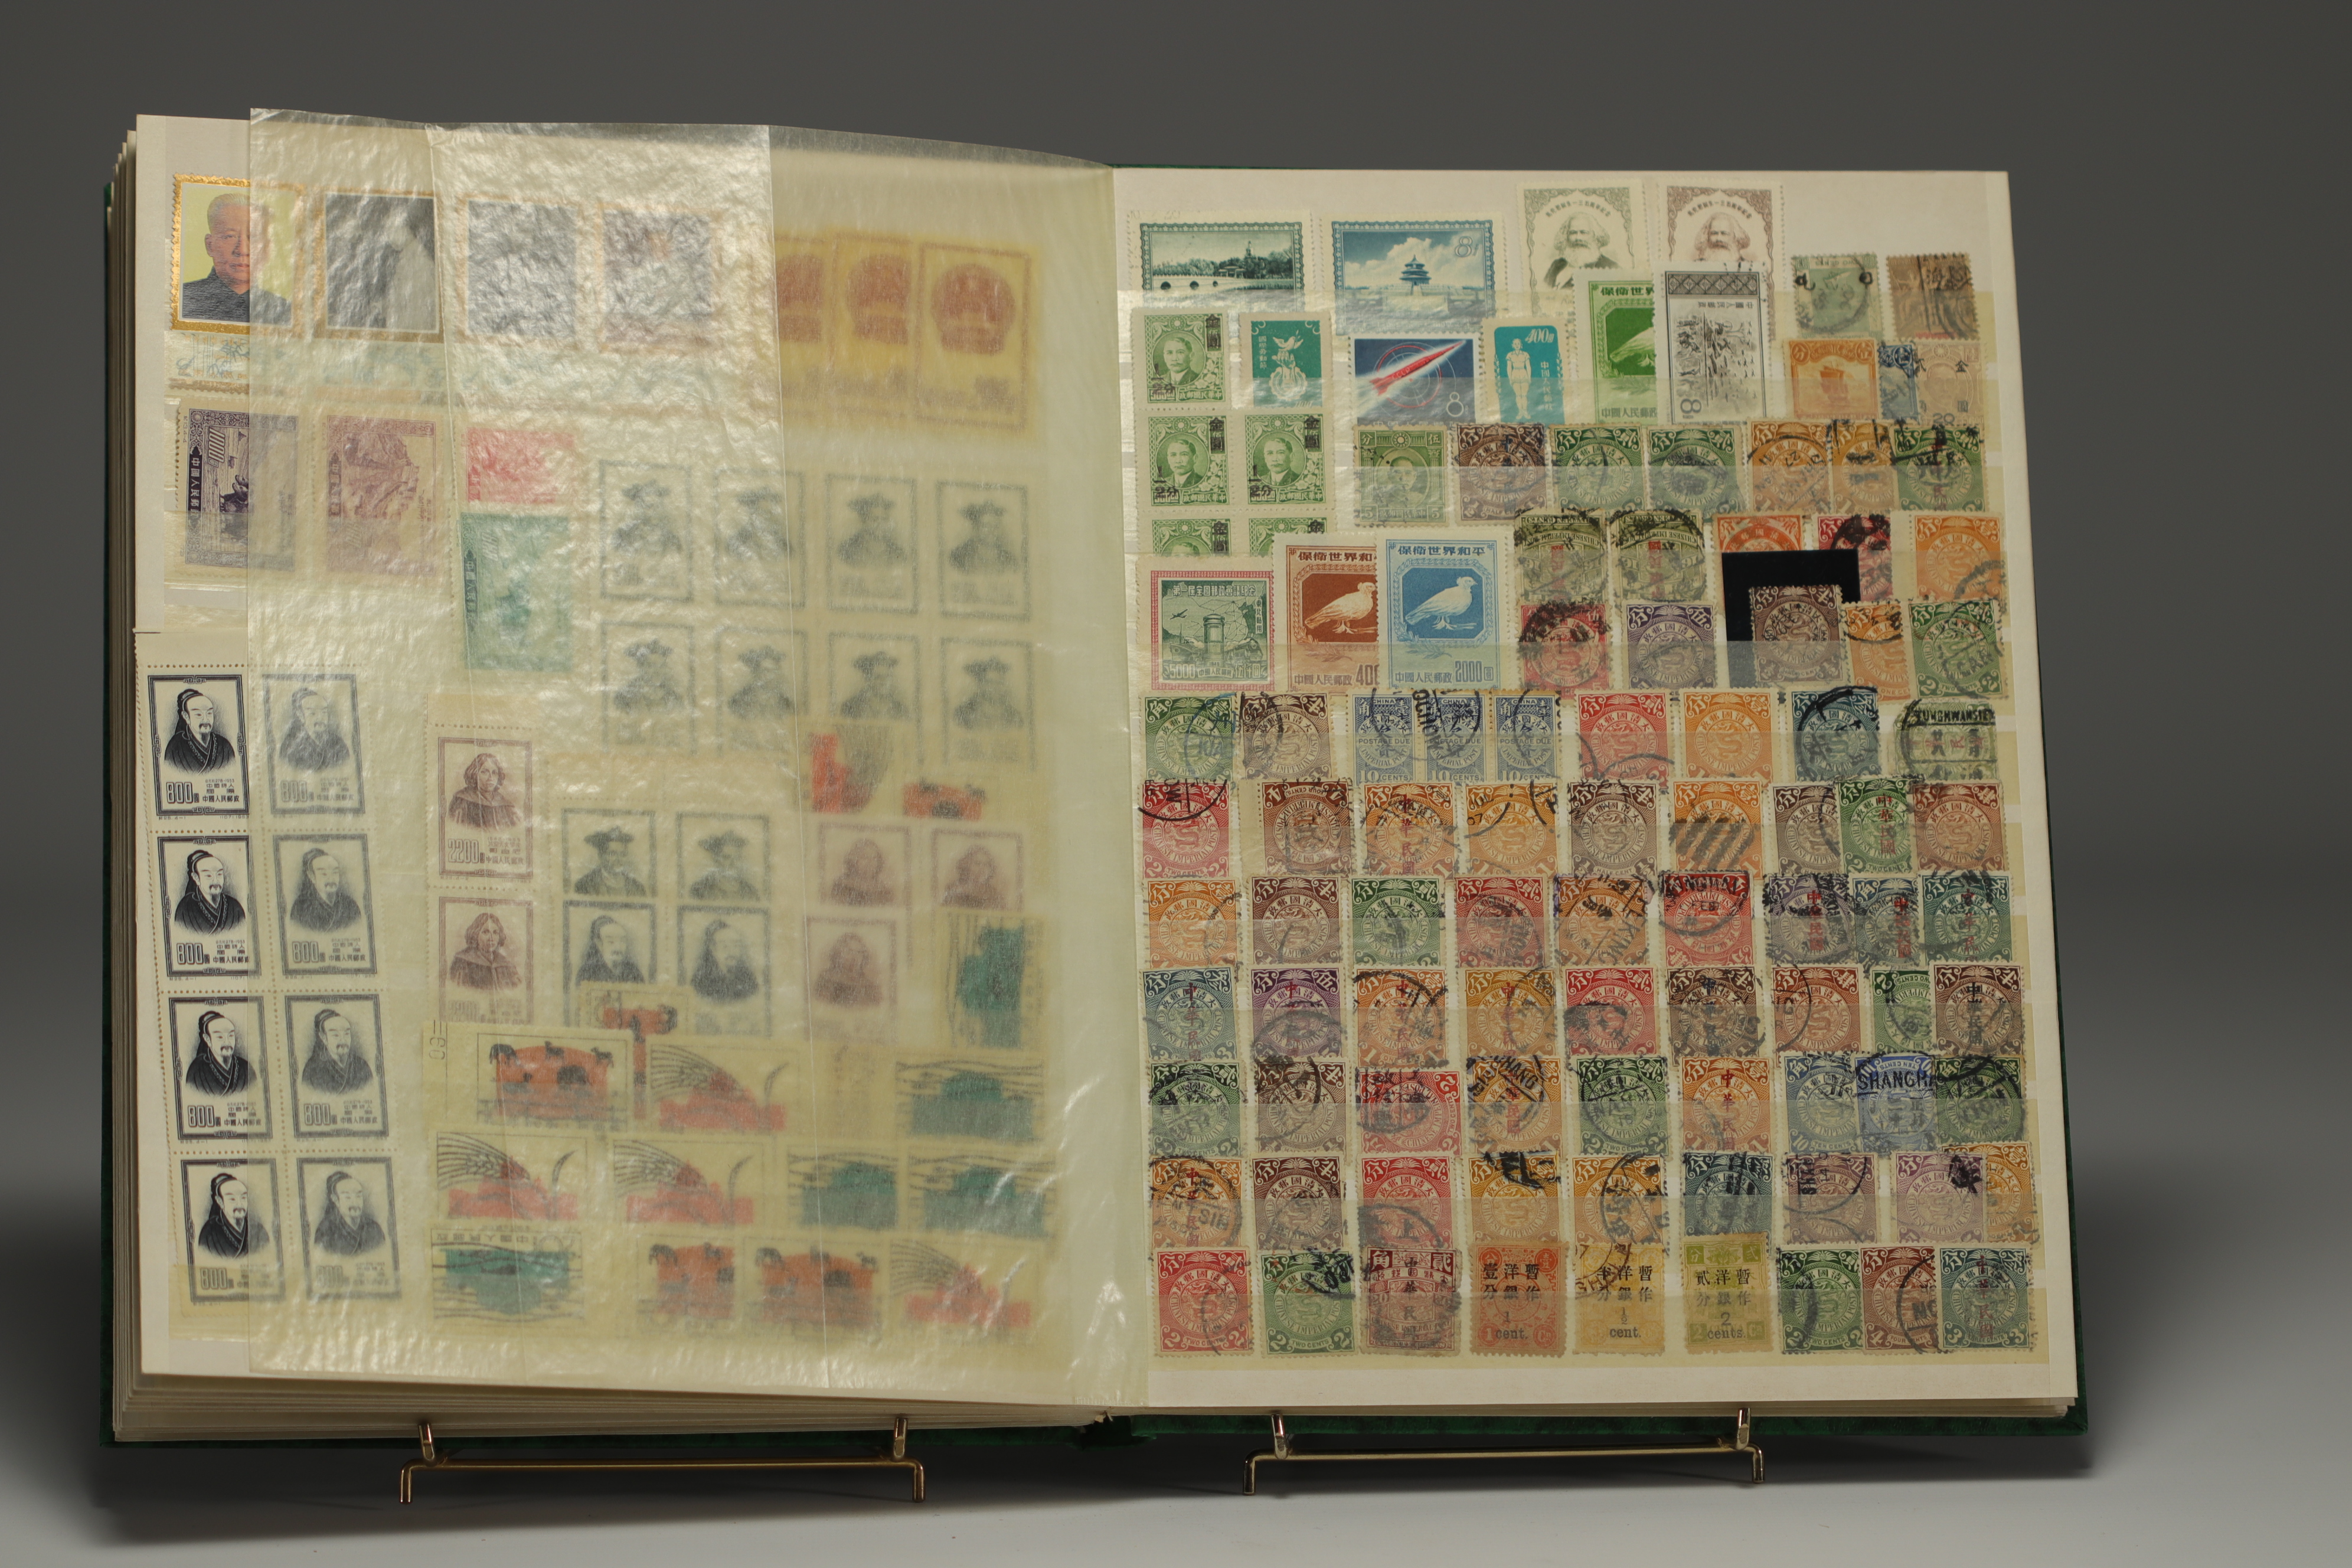 Set of 26 albums of world stamps, China, Japan, Middle East, Europe, etc. (Lot 3) - Image 14 of 17